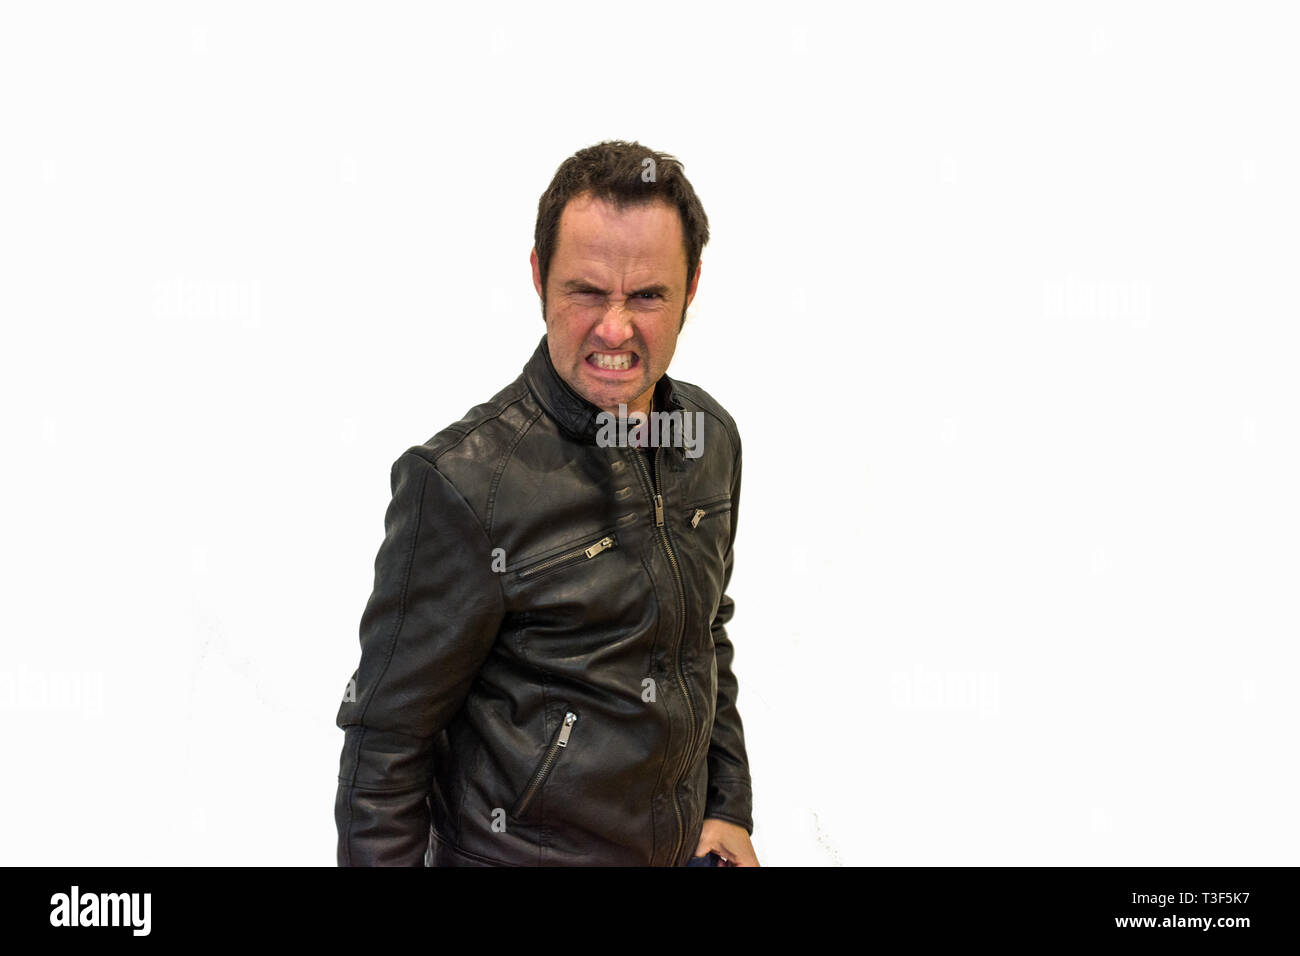 Angry man with black jacket on white background Stock Photo